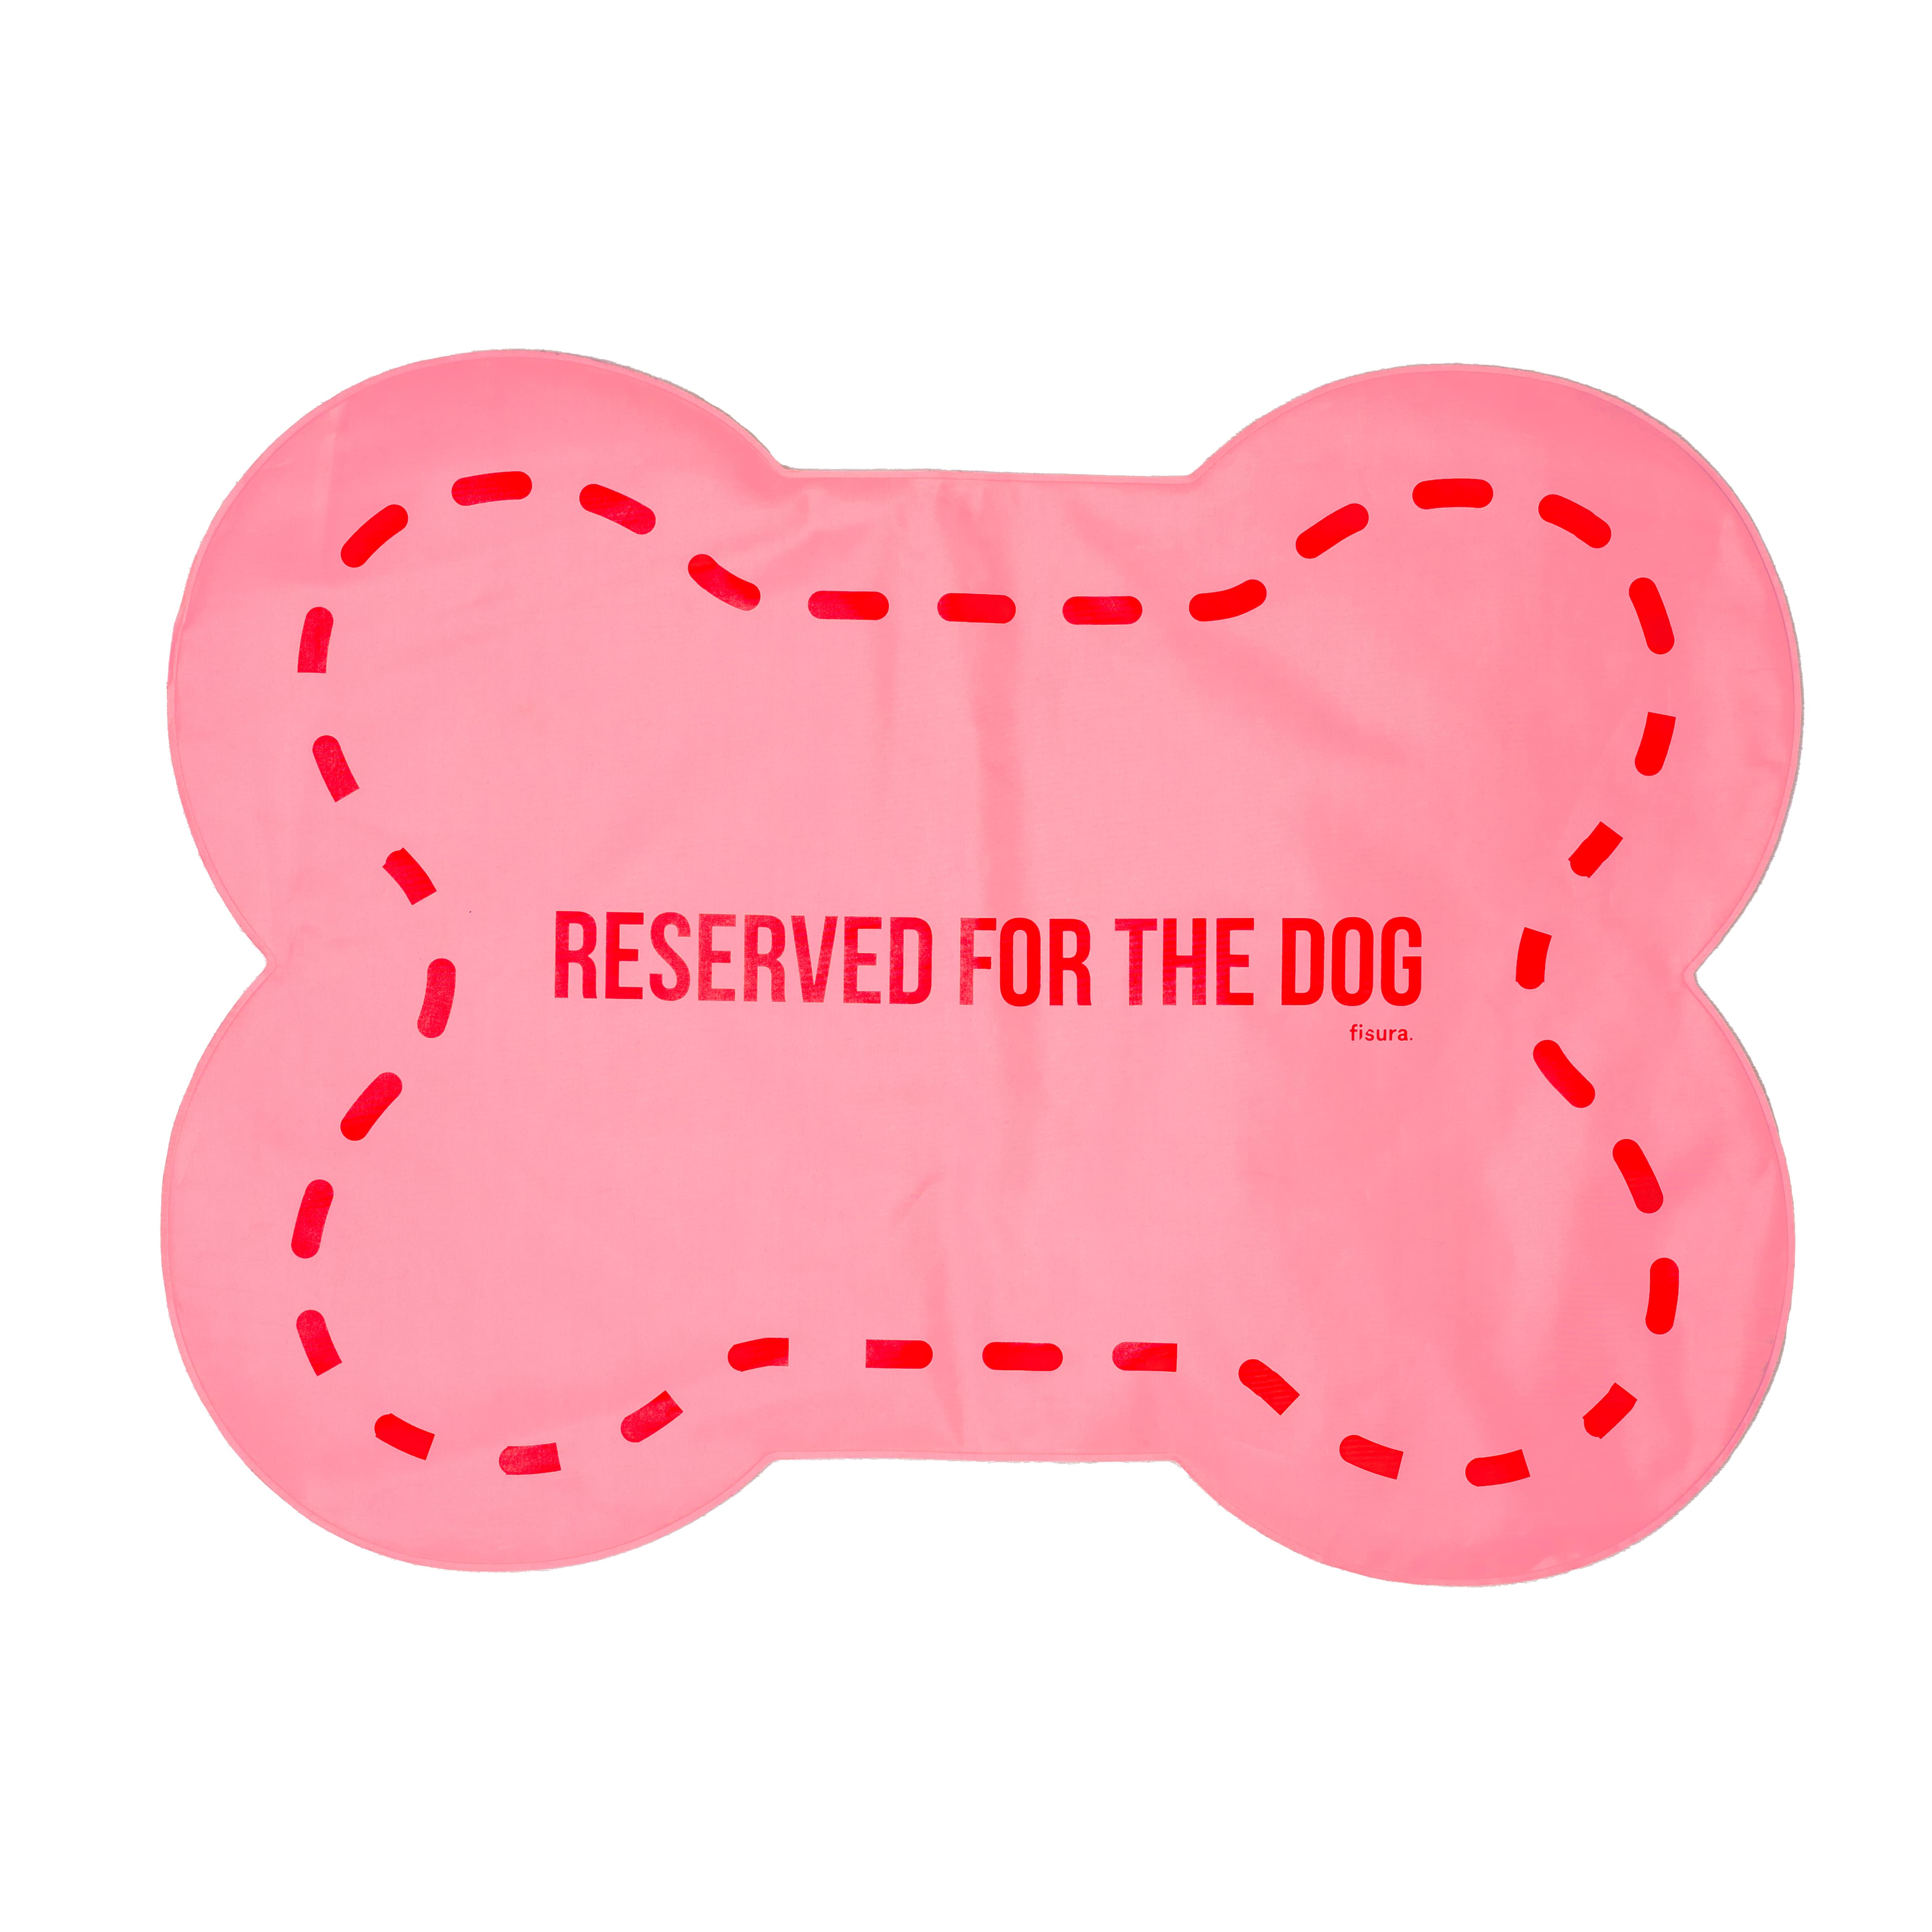 Manta refrescante para perros reversible “reserved for the dog”